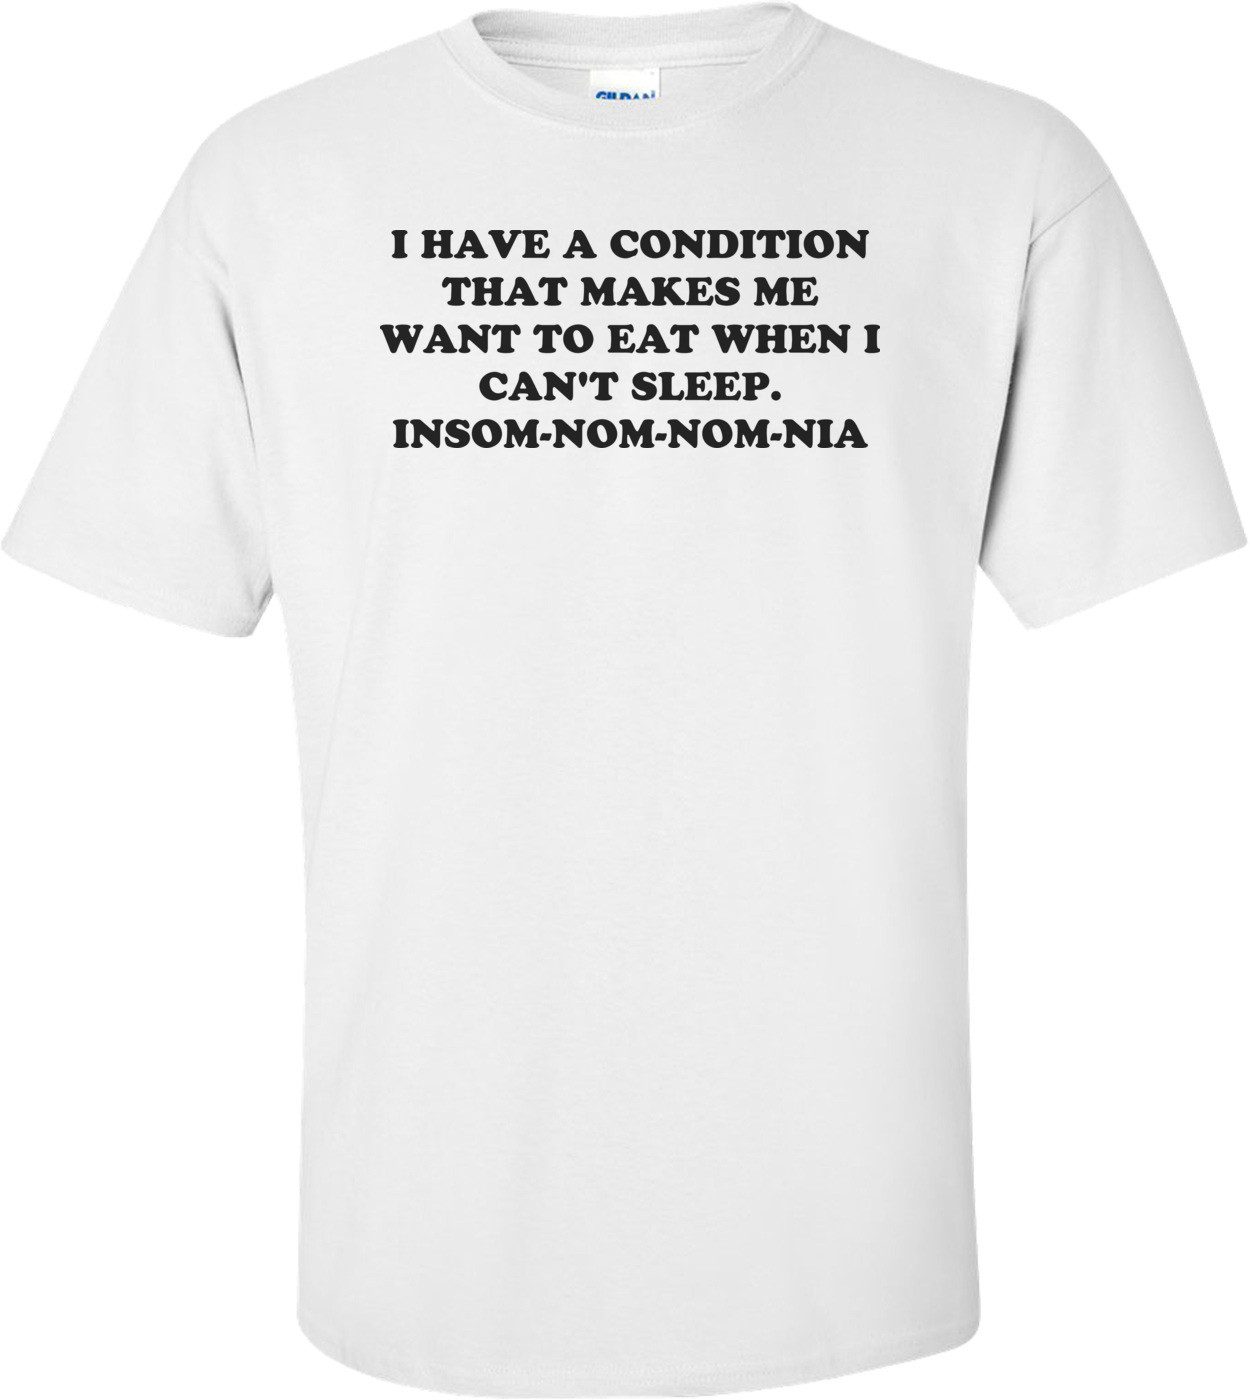 I Have A Condition That Makes Me Want To Eat When I Can't Sleep. Insom-nom-nom-nia Shirt